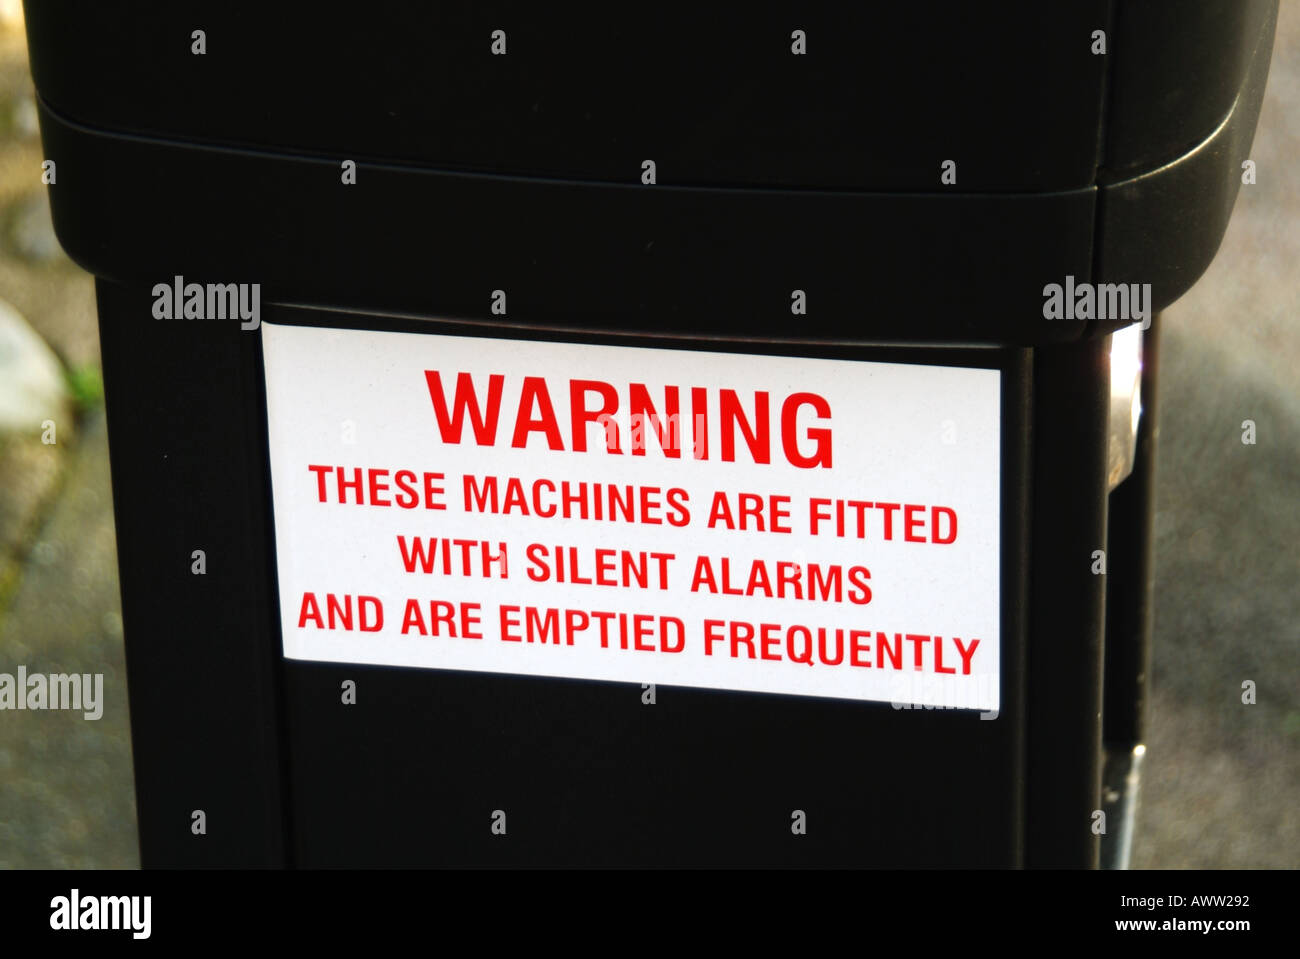 On street car parking ticket machine warning notice of silent alarm and frequent emptying of coins Stock Photo